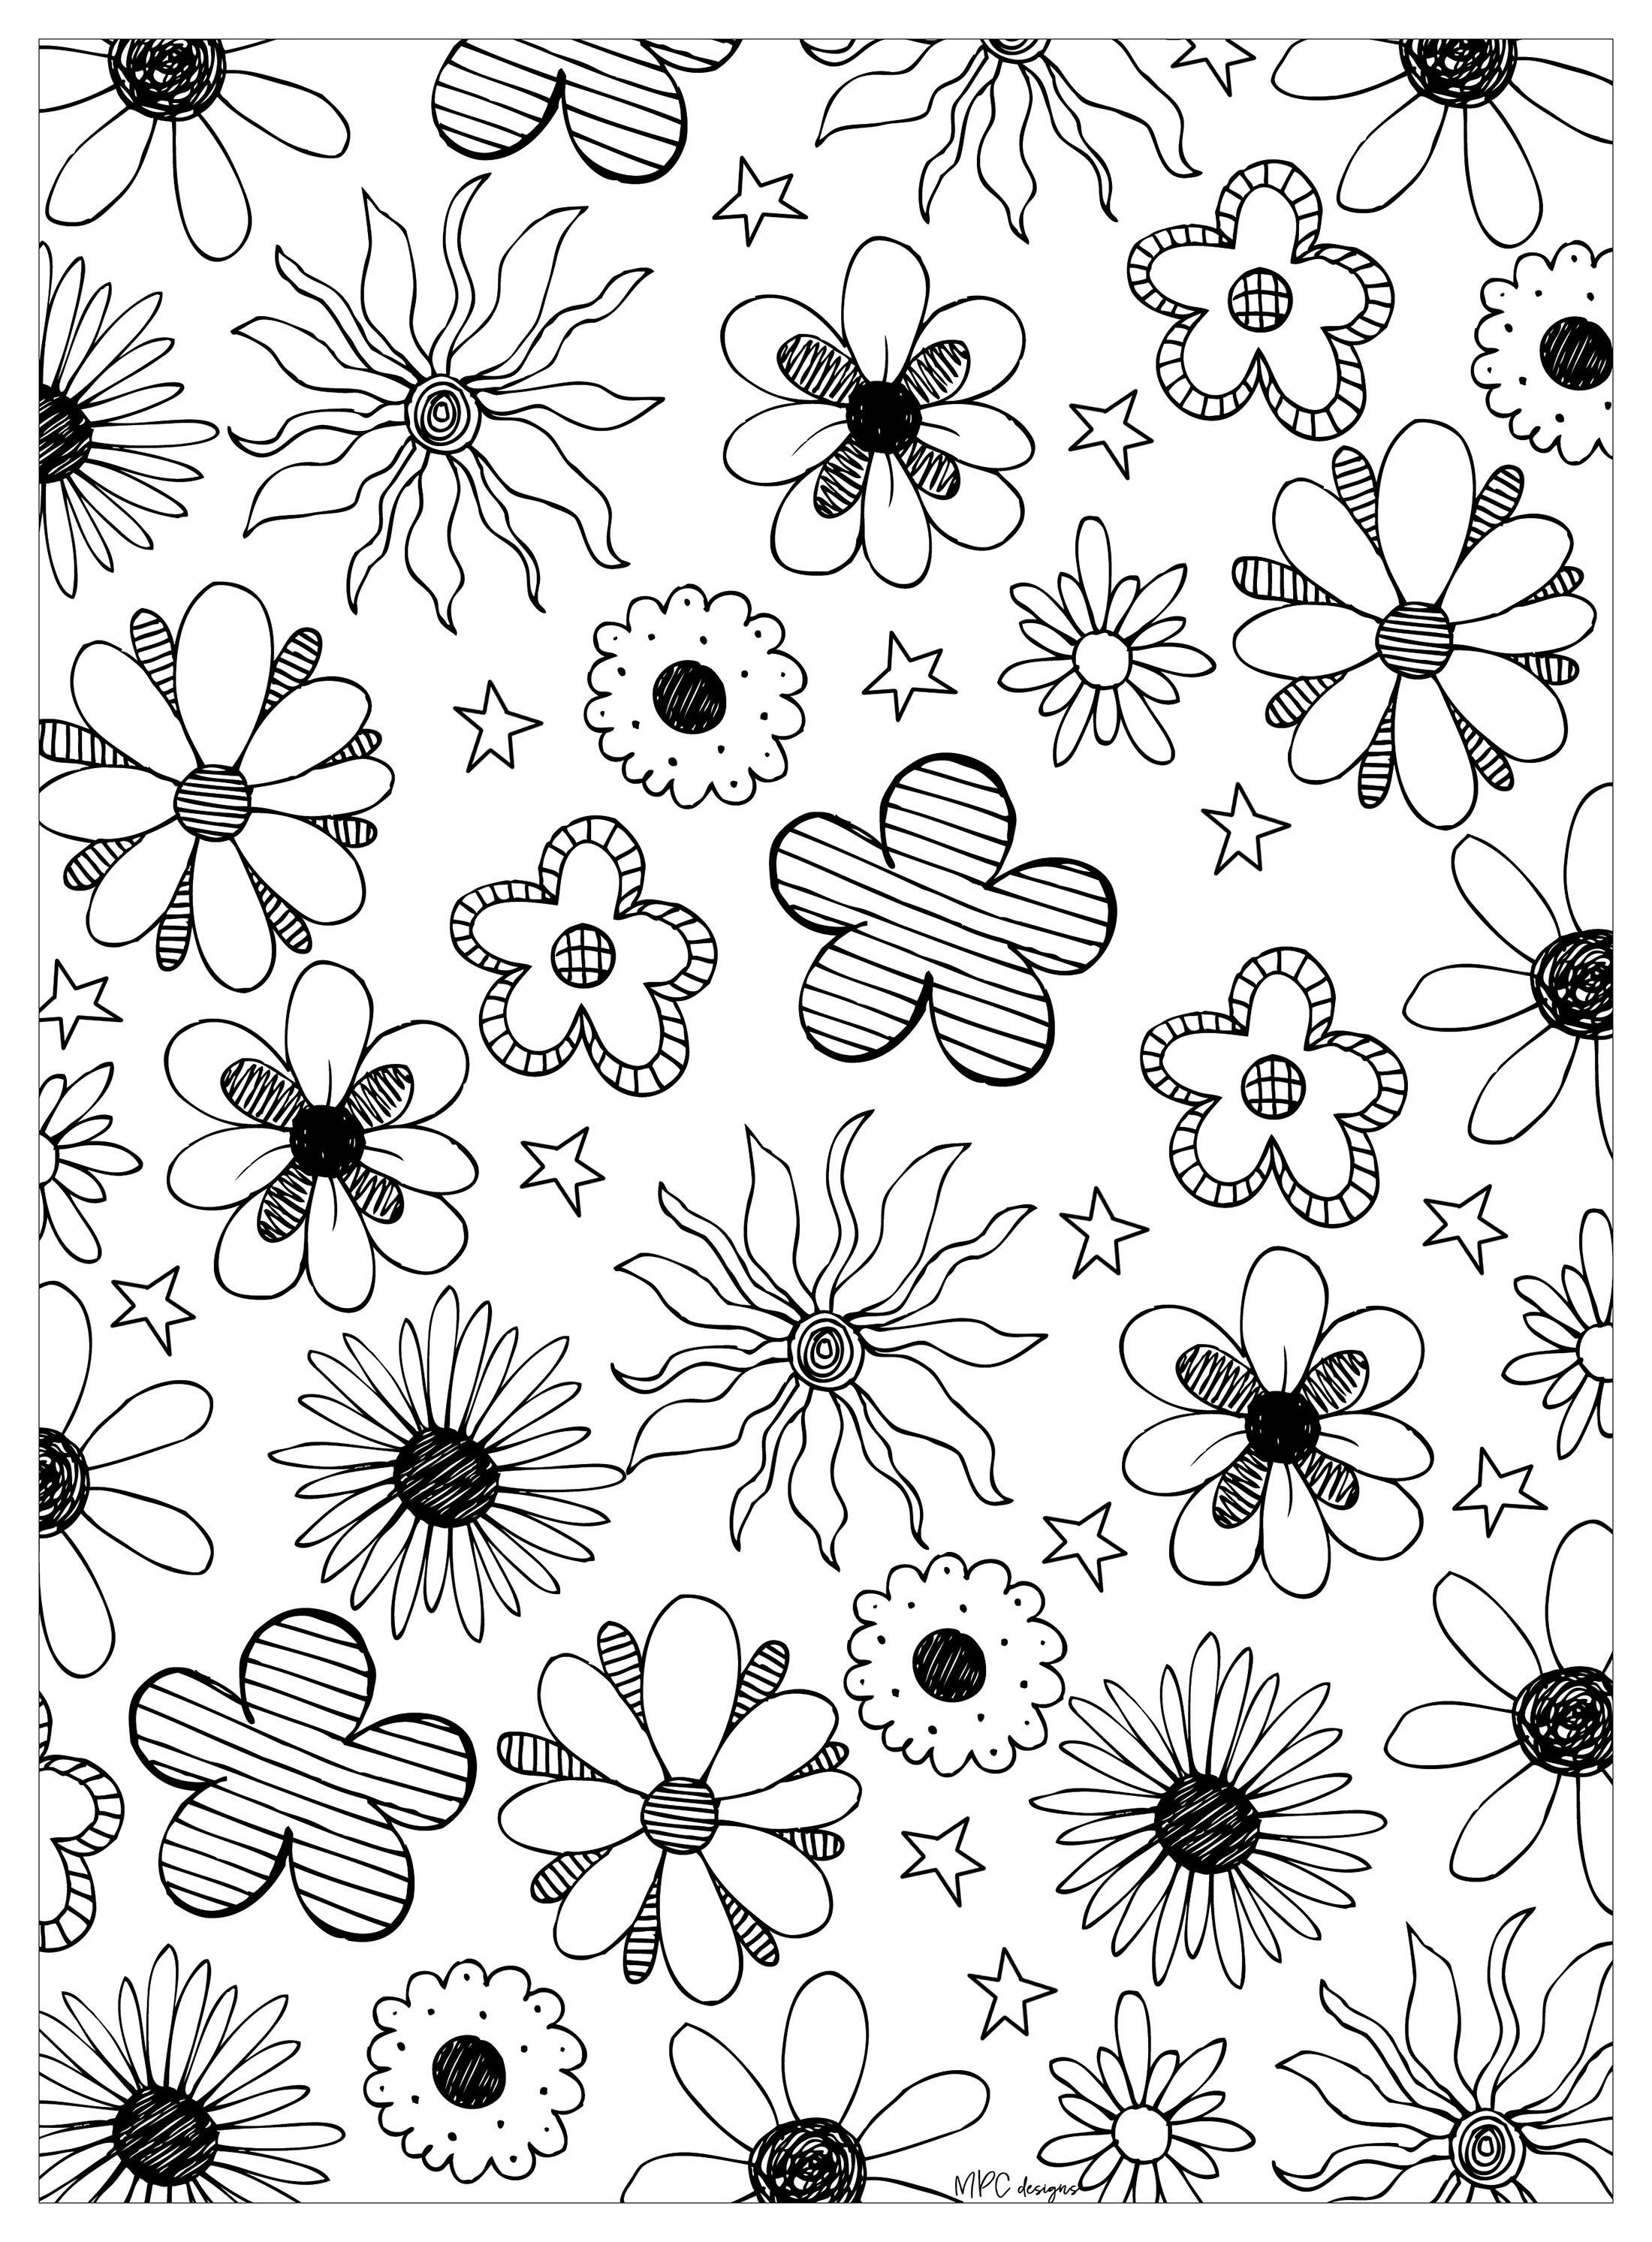 Download Mpc design - Flowers Adult Coloring Pages